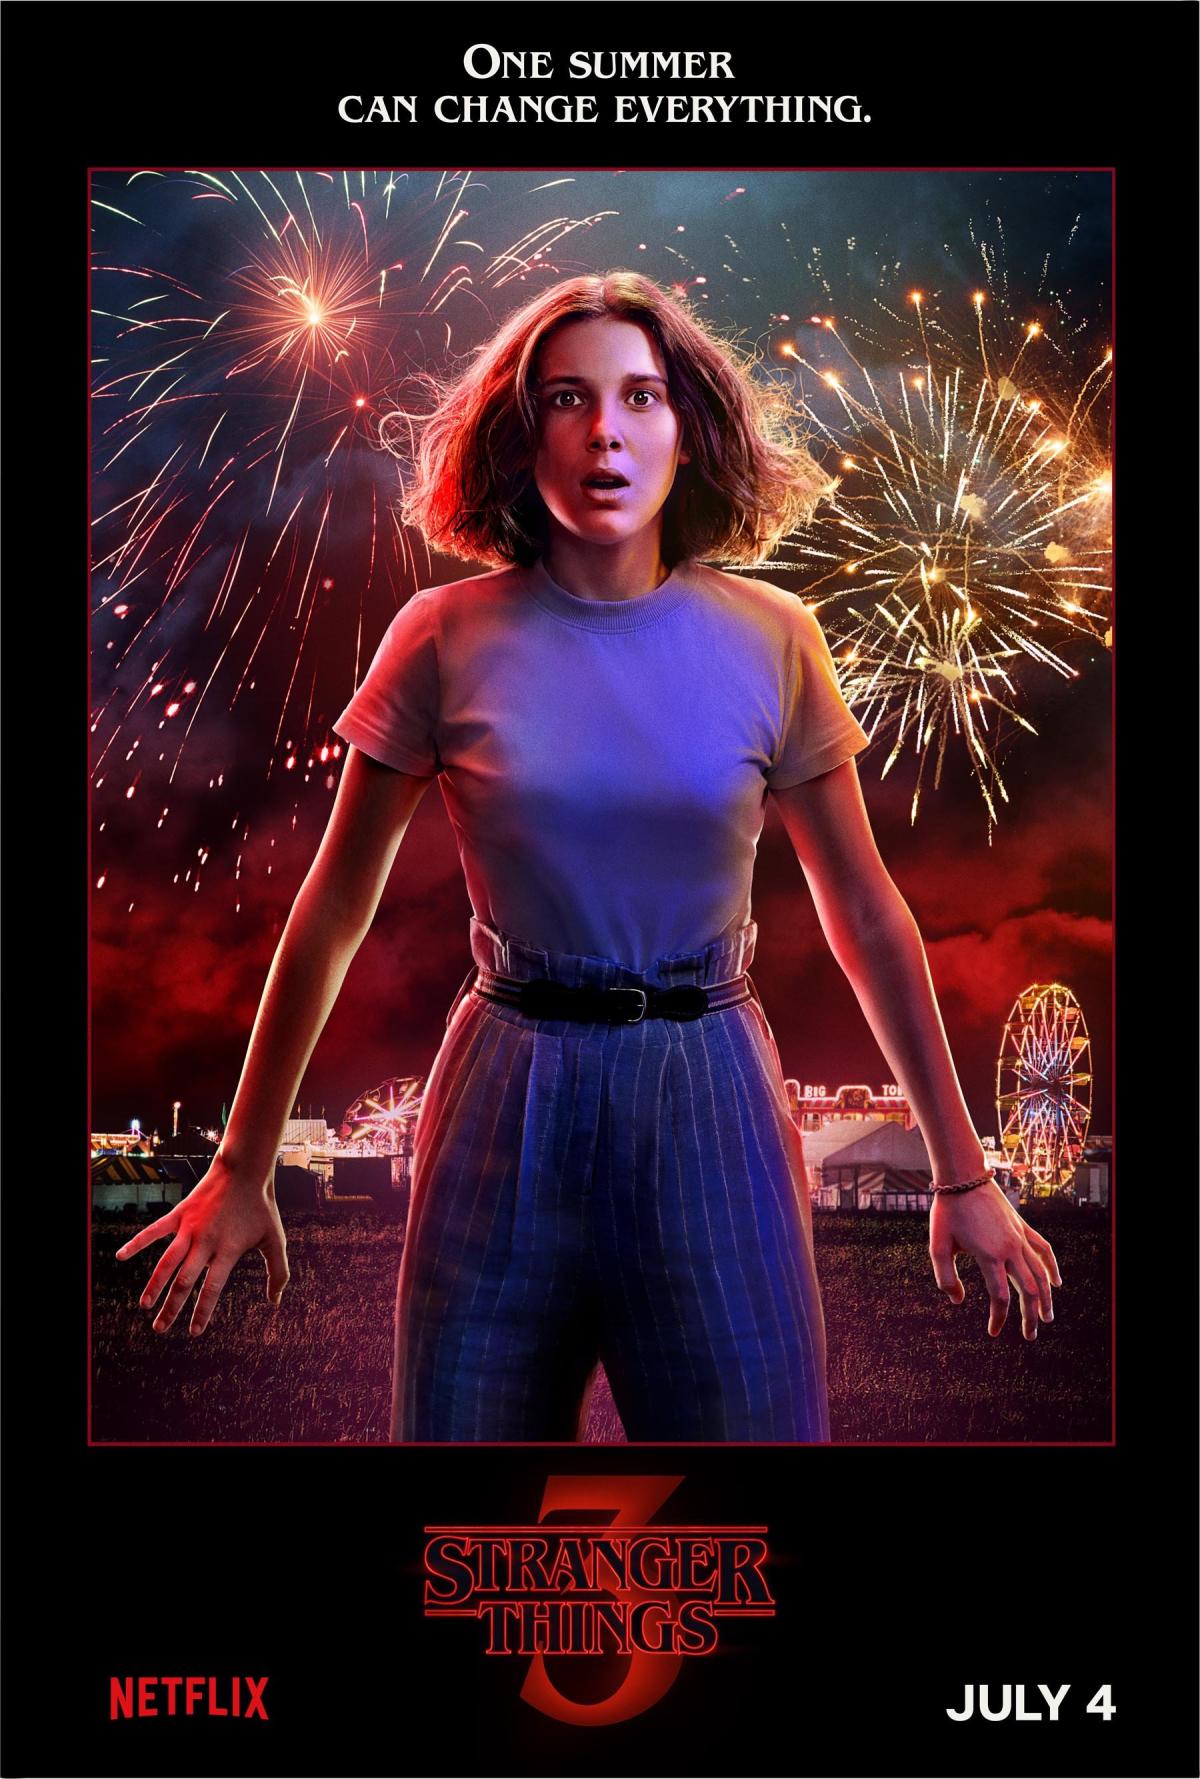 Stranger Things 3' debuts character posters and scene from the premiere